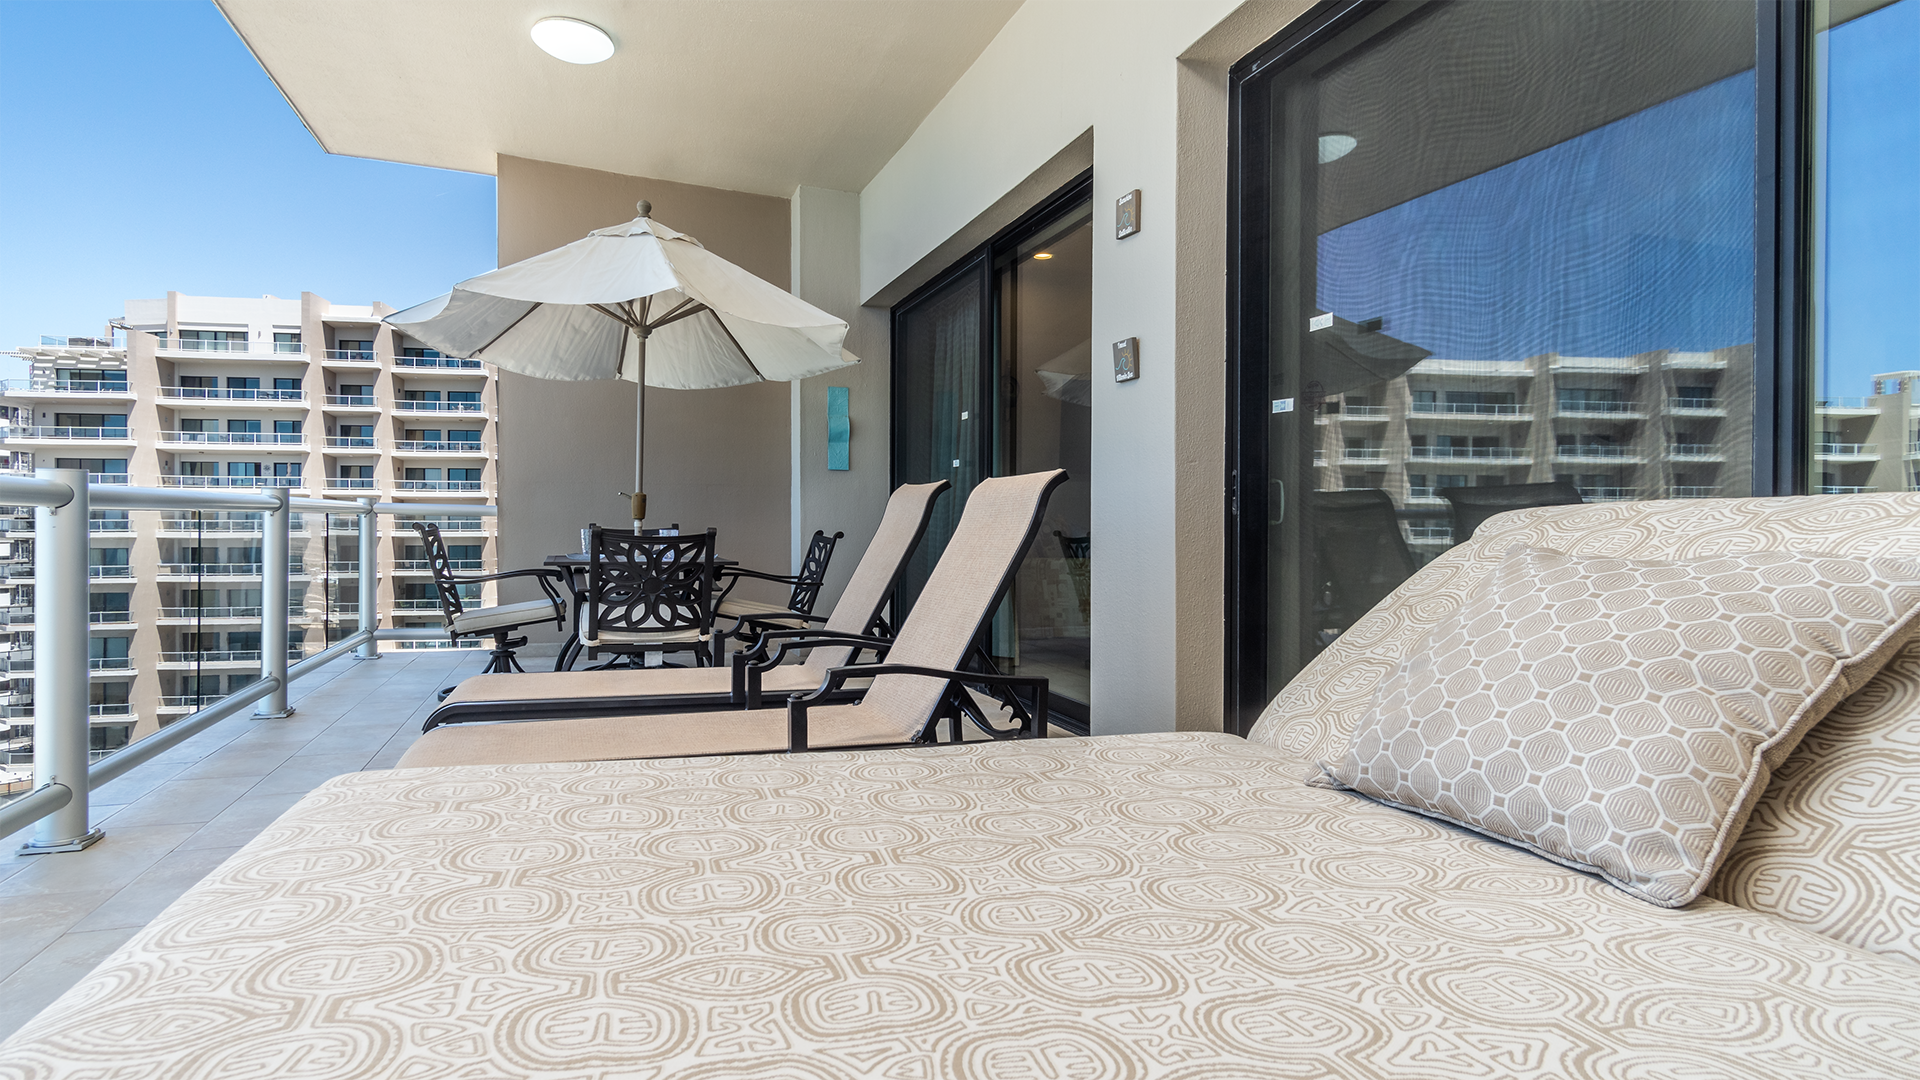 the balcony has a spacious and fully furnished